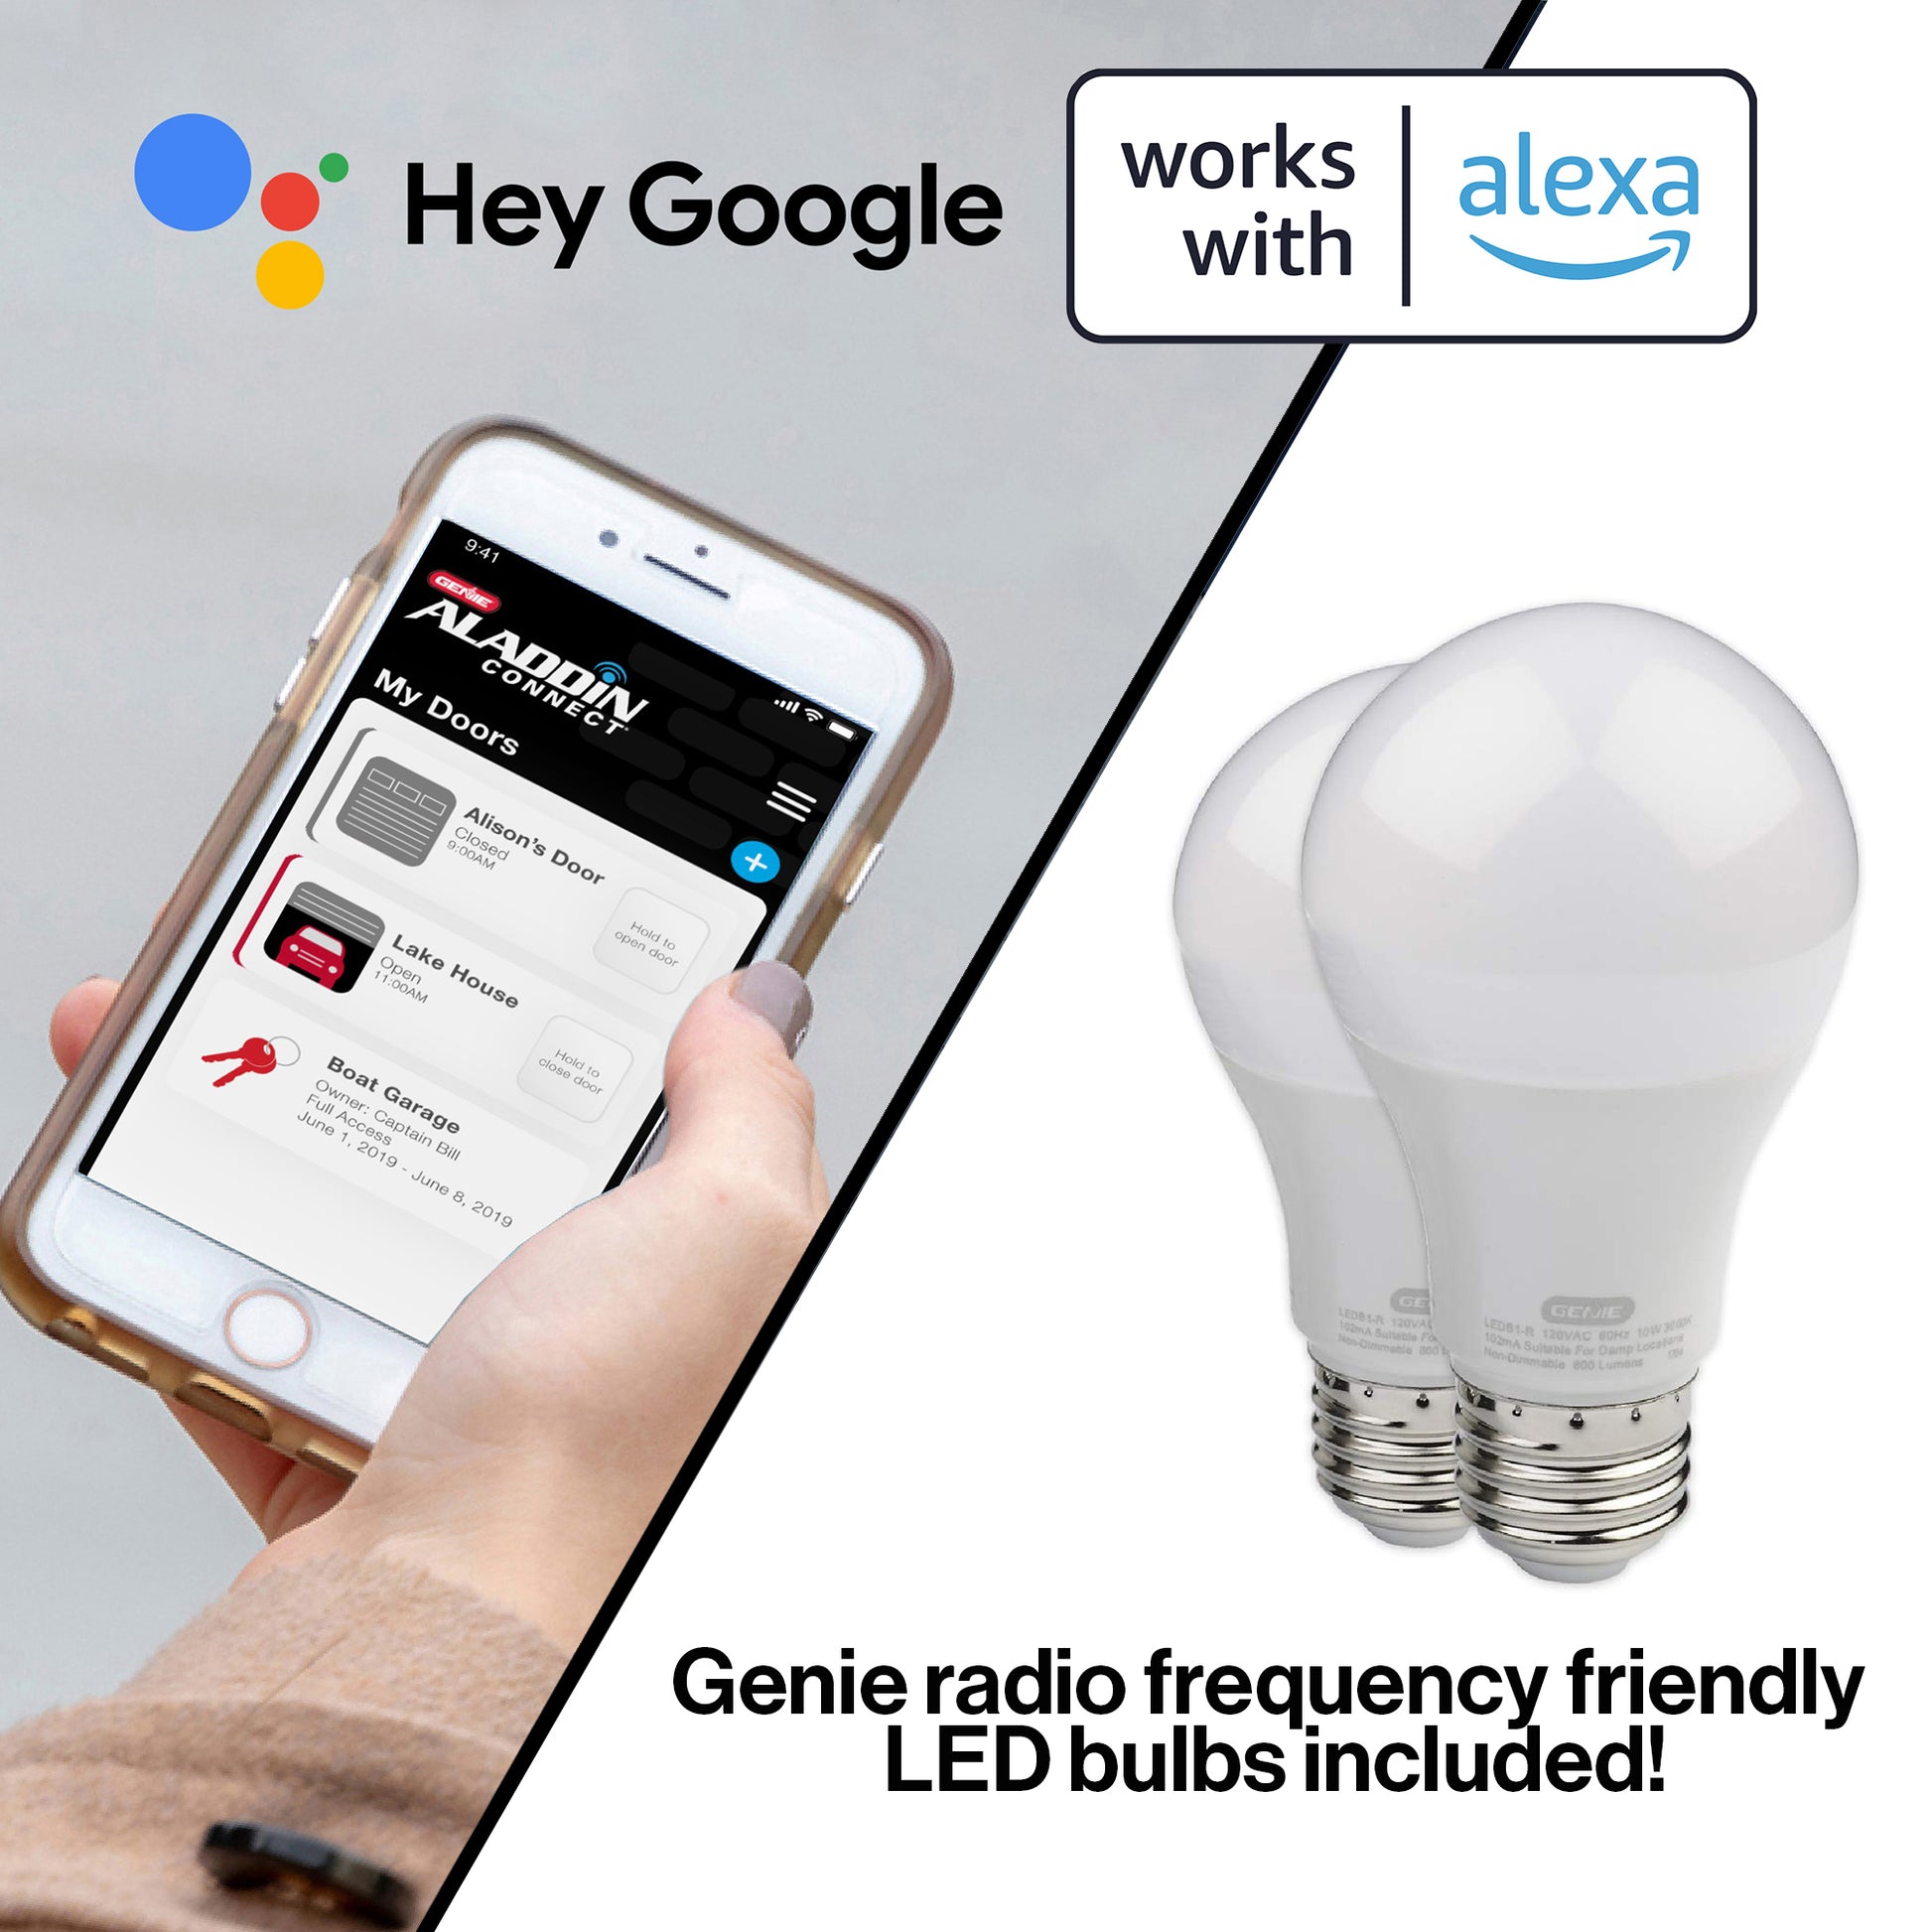 Genie Chain Glide Connect Essentials Smart garage door opener comes with LED light bulbs and Works with Alexa and Hey Google